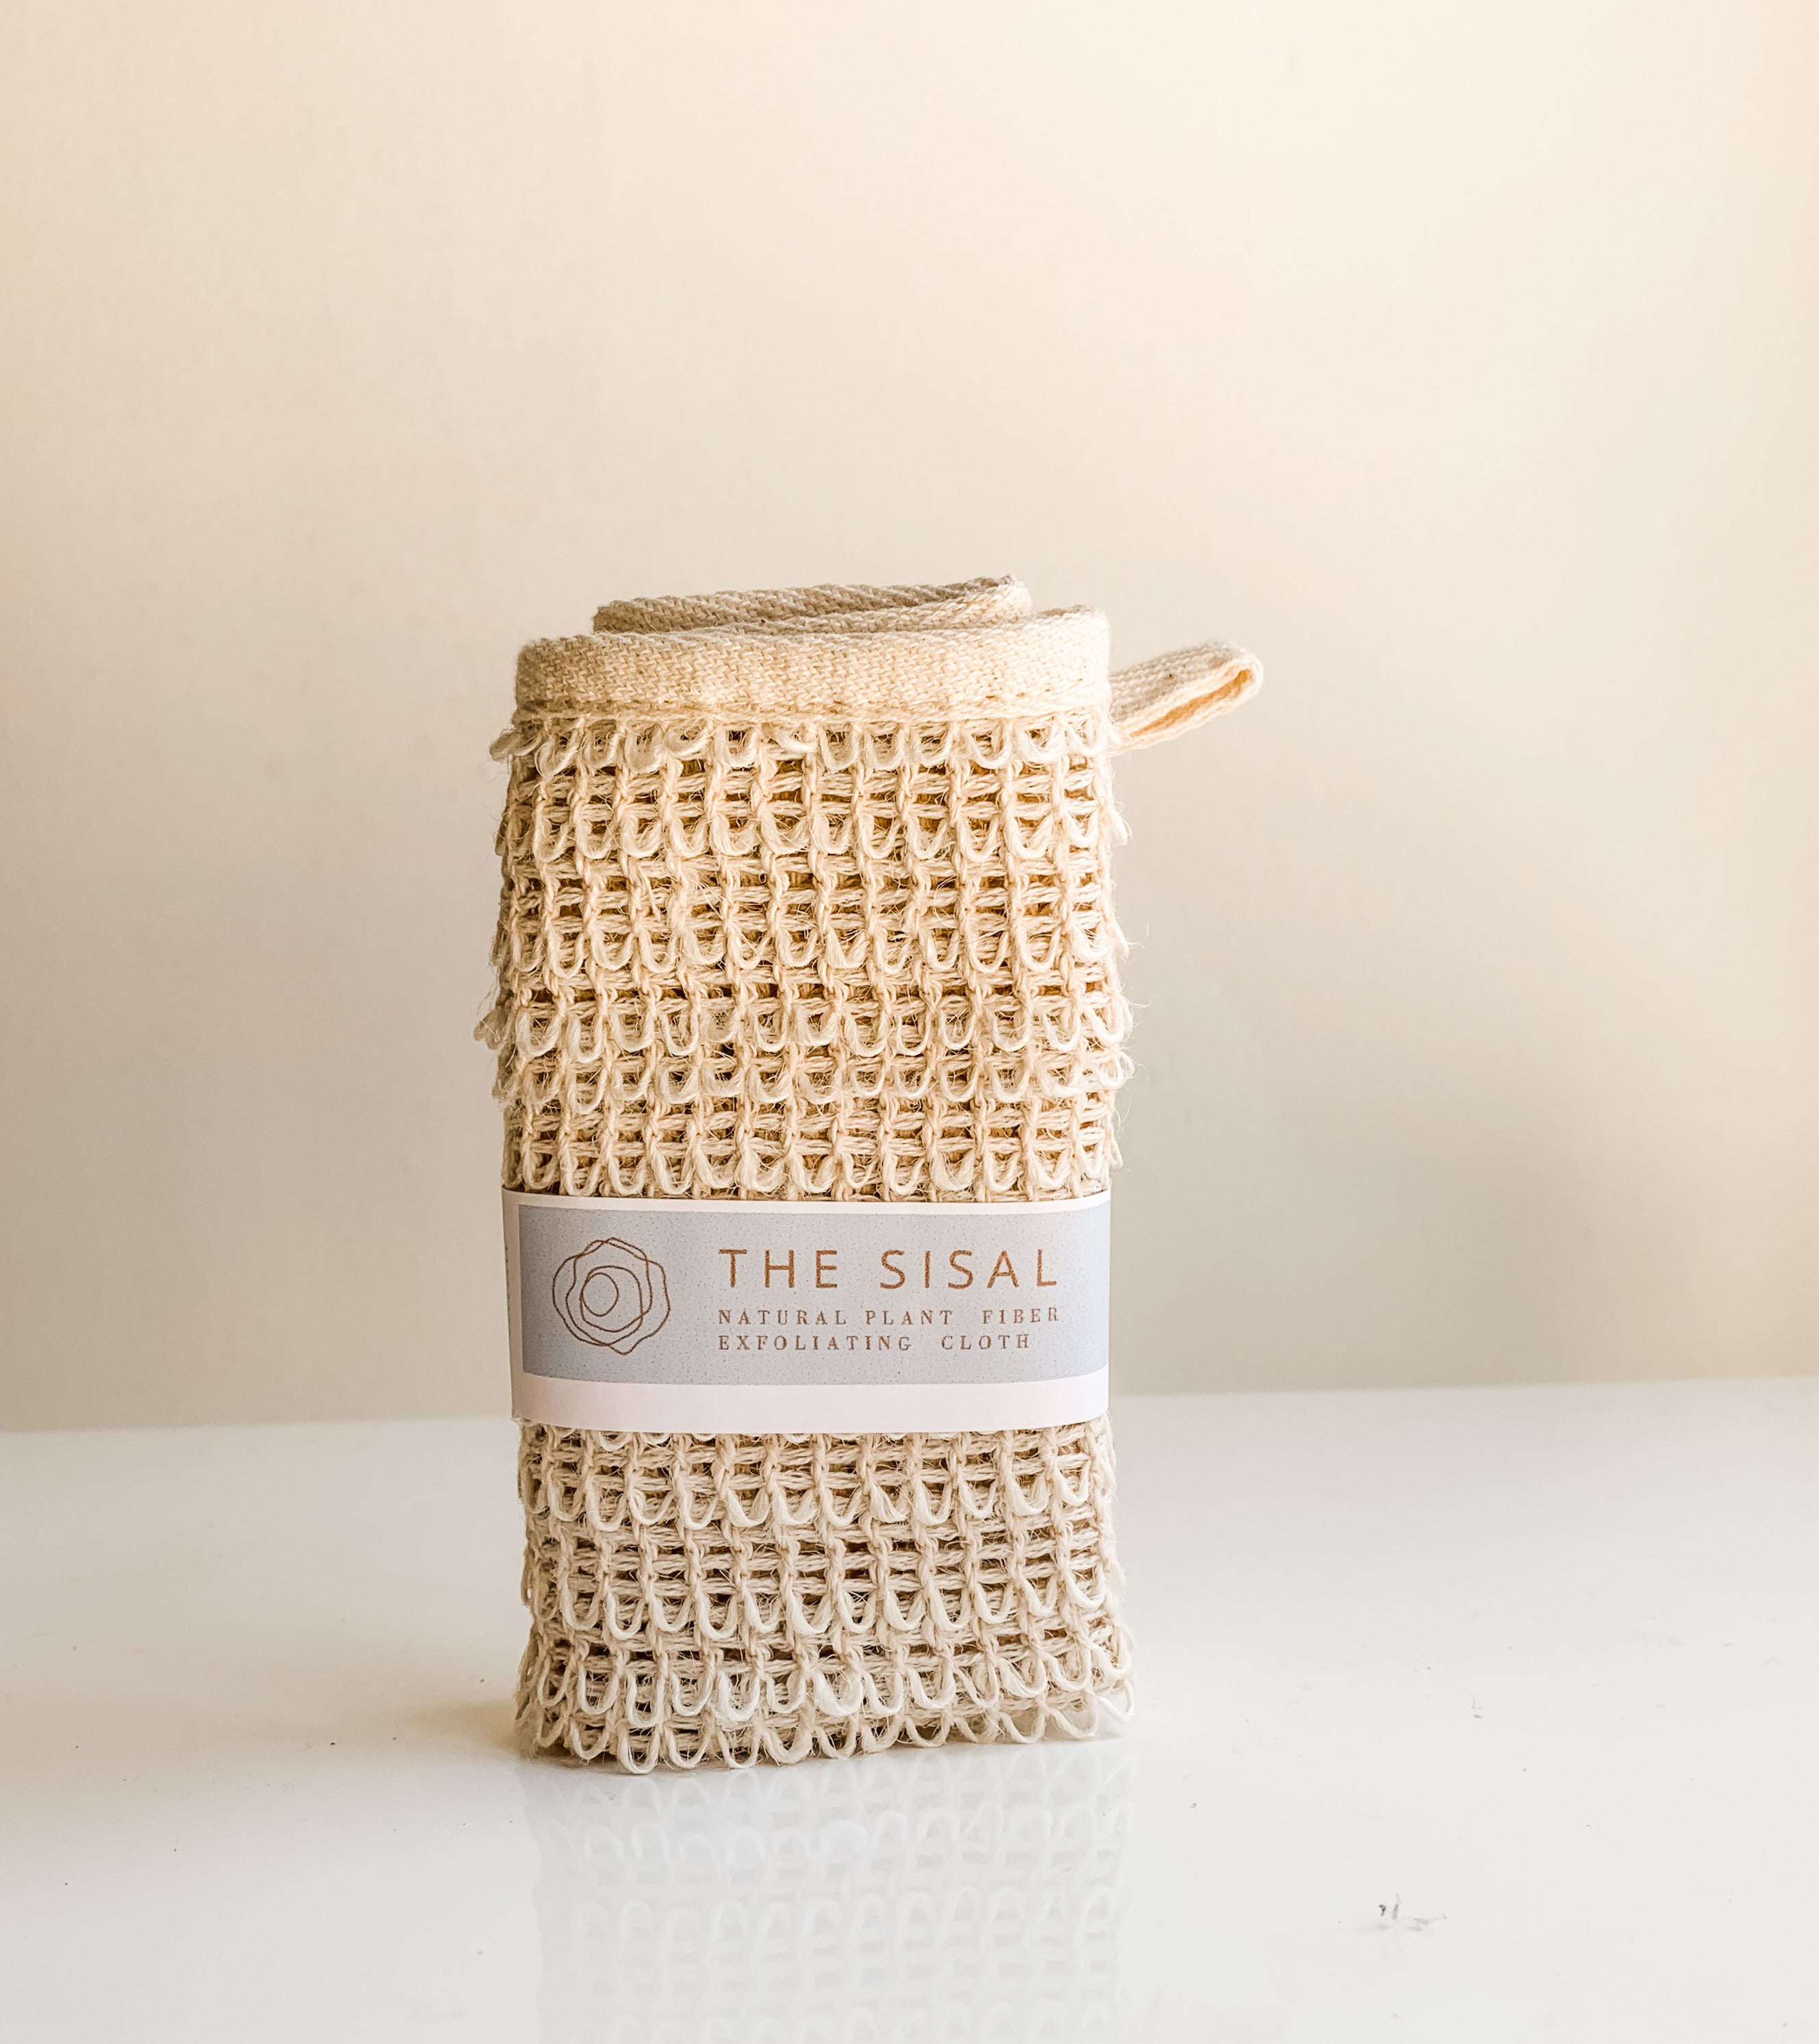 Sisal Wash Cloth - Handmade with Natural Ingredients. Hidden Forest Naturals